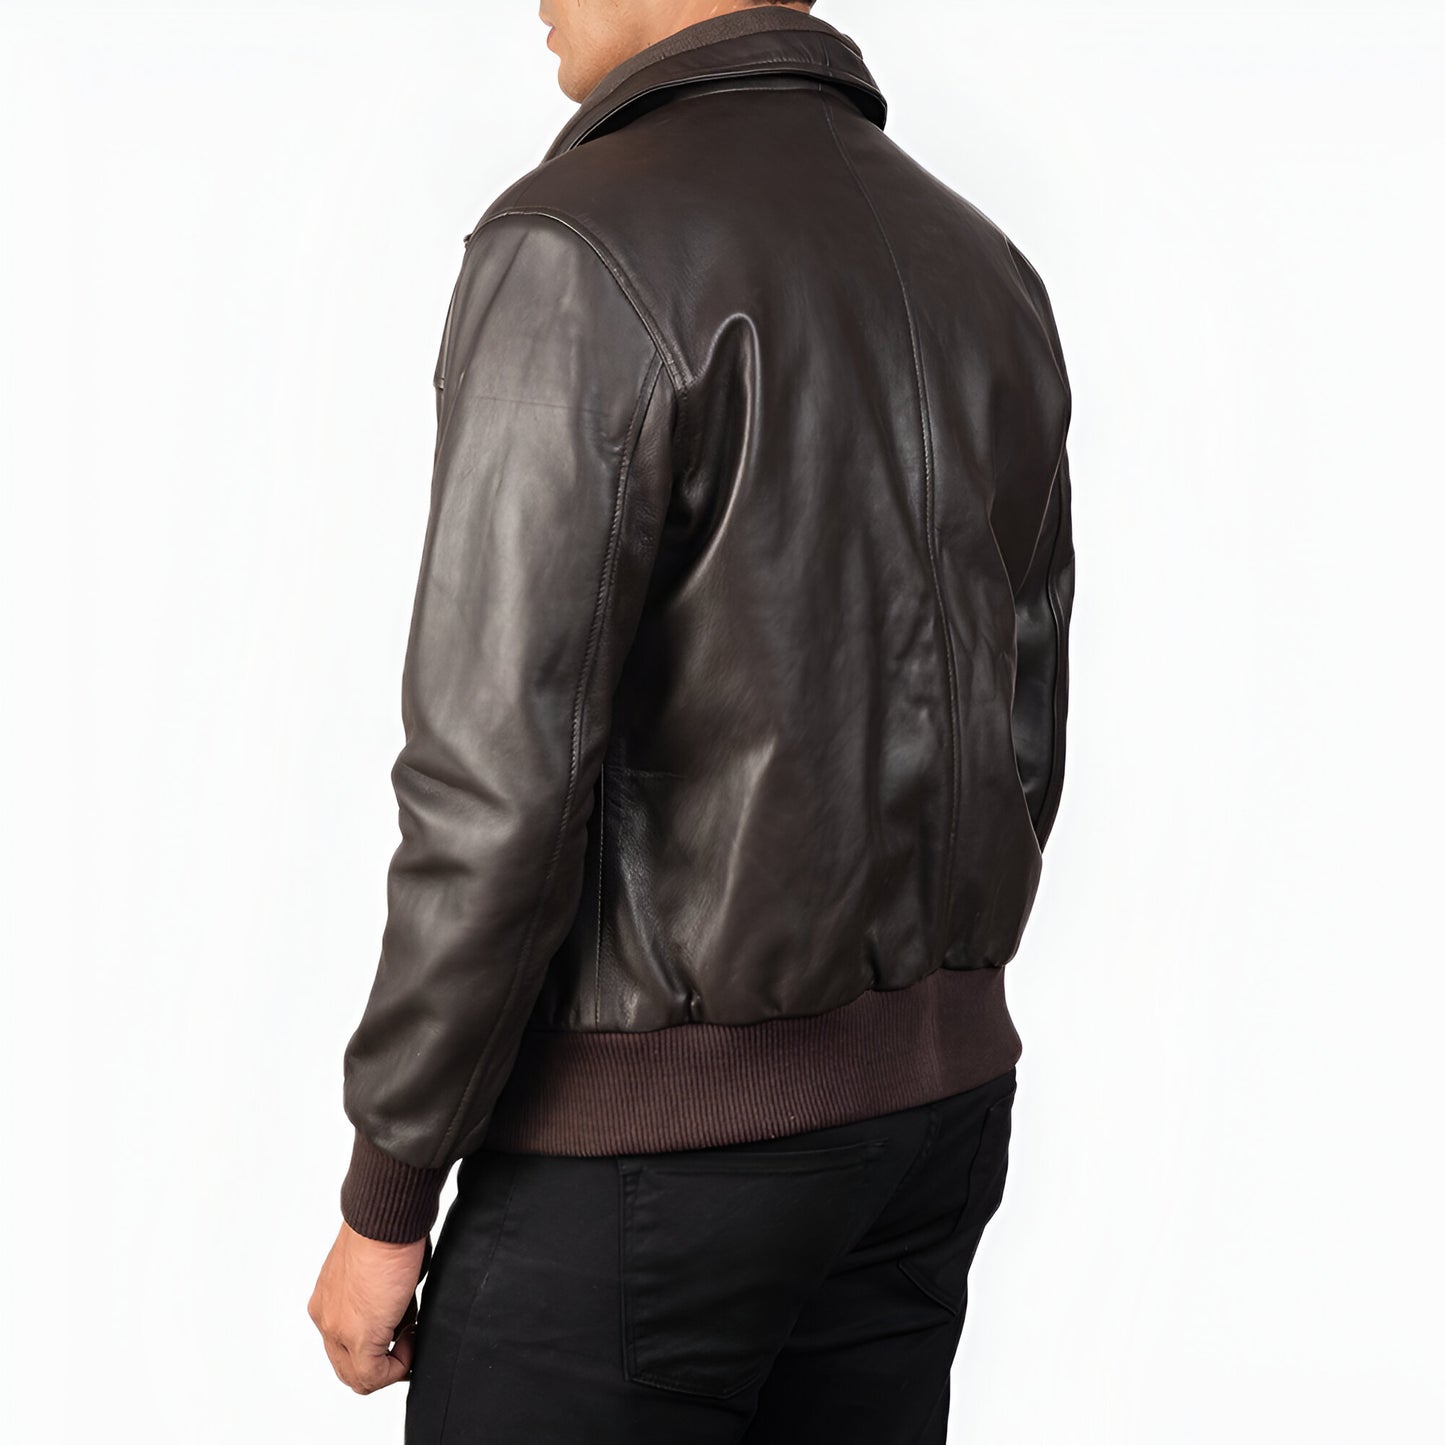 Dicks Leather Genuine Brown Leather Bomber Jacket